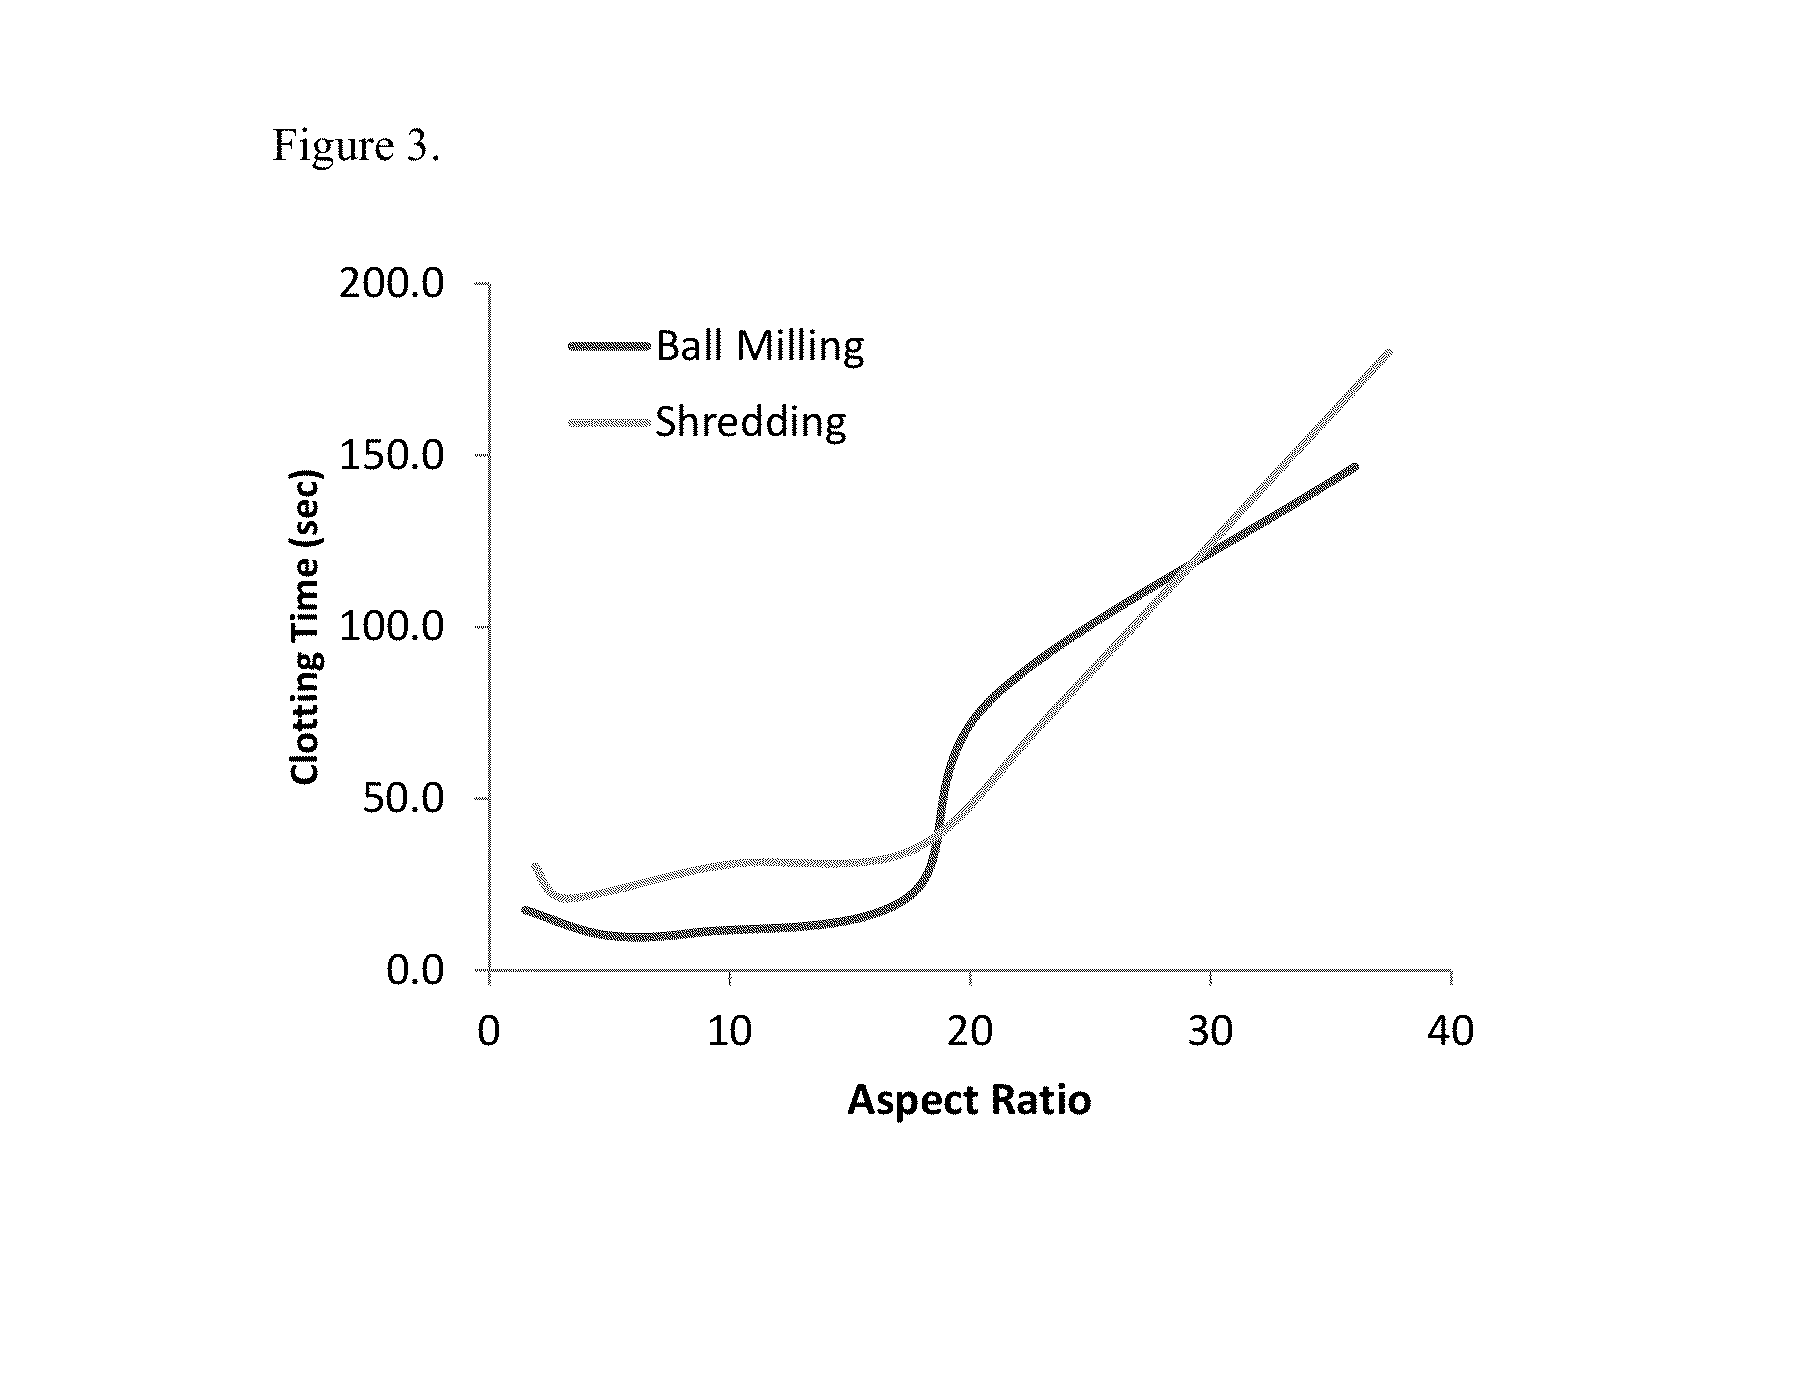 Oxidized regenerated cellulose hemostatic powders and methods of making